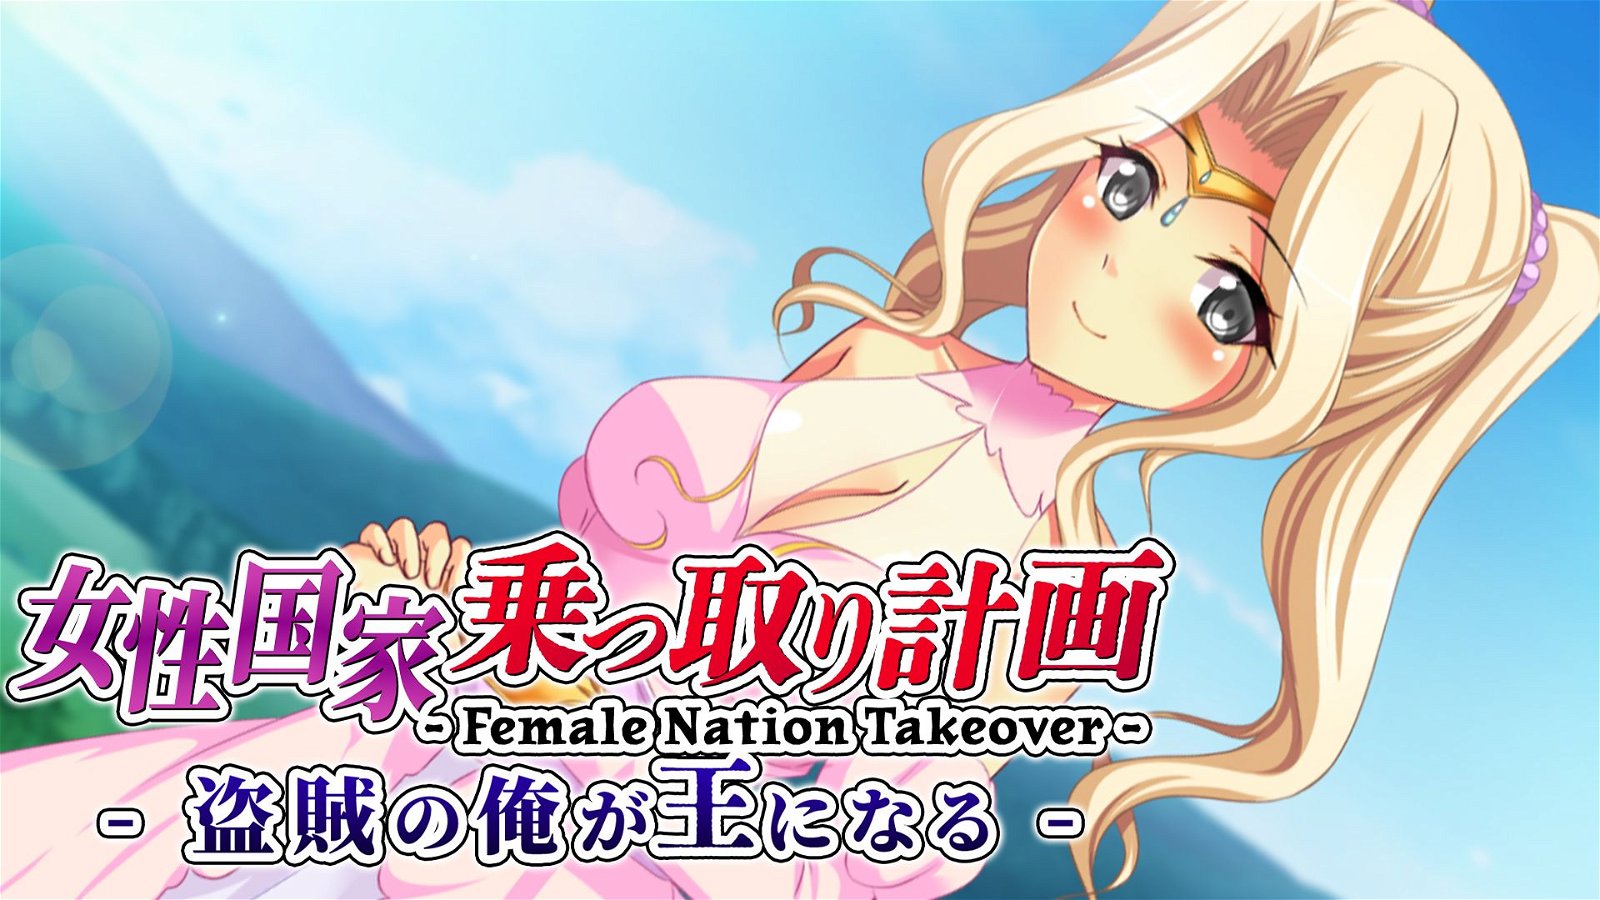 Image of Female Nation Takeover  女性国家乗っ取り計画 - 盗賊の俺が王になる -